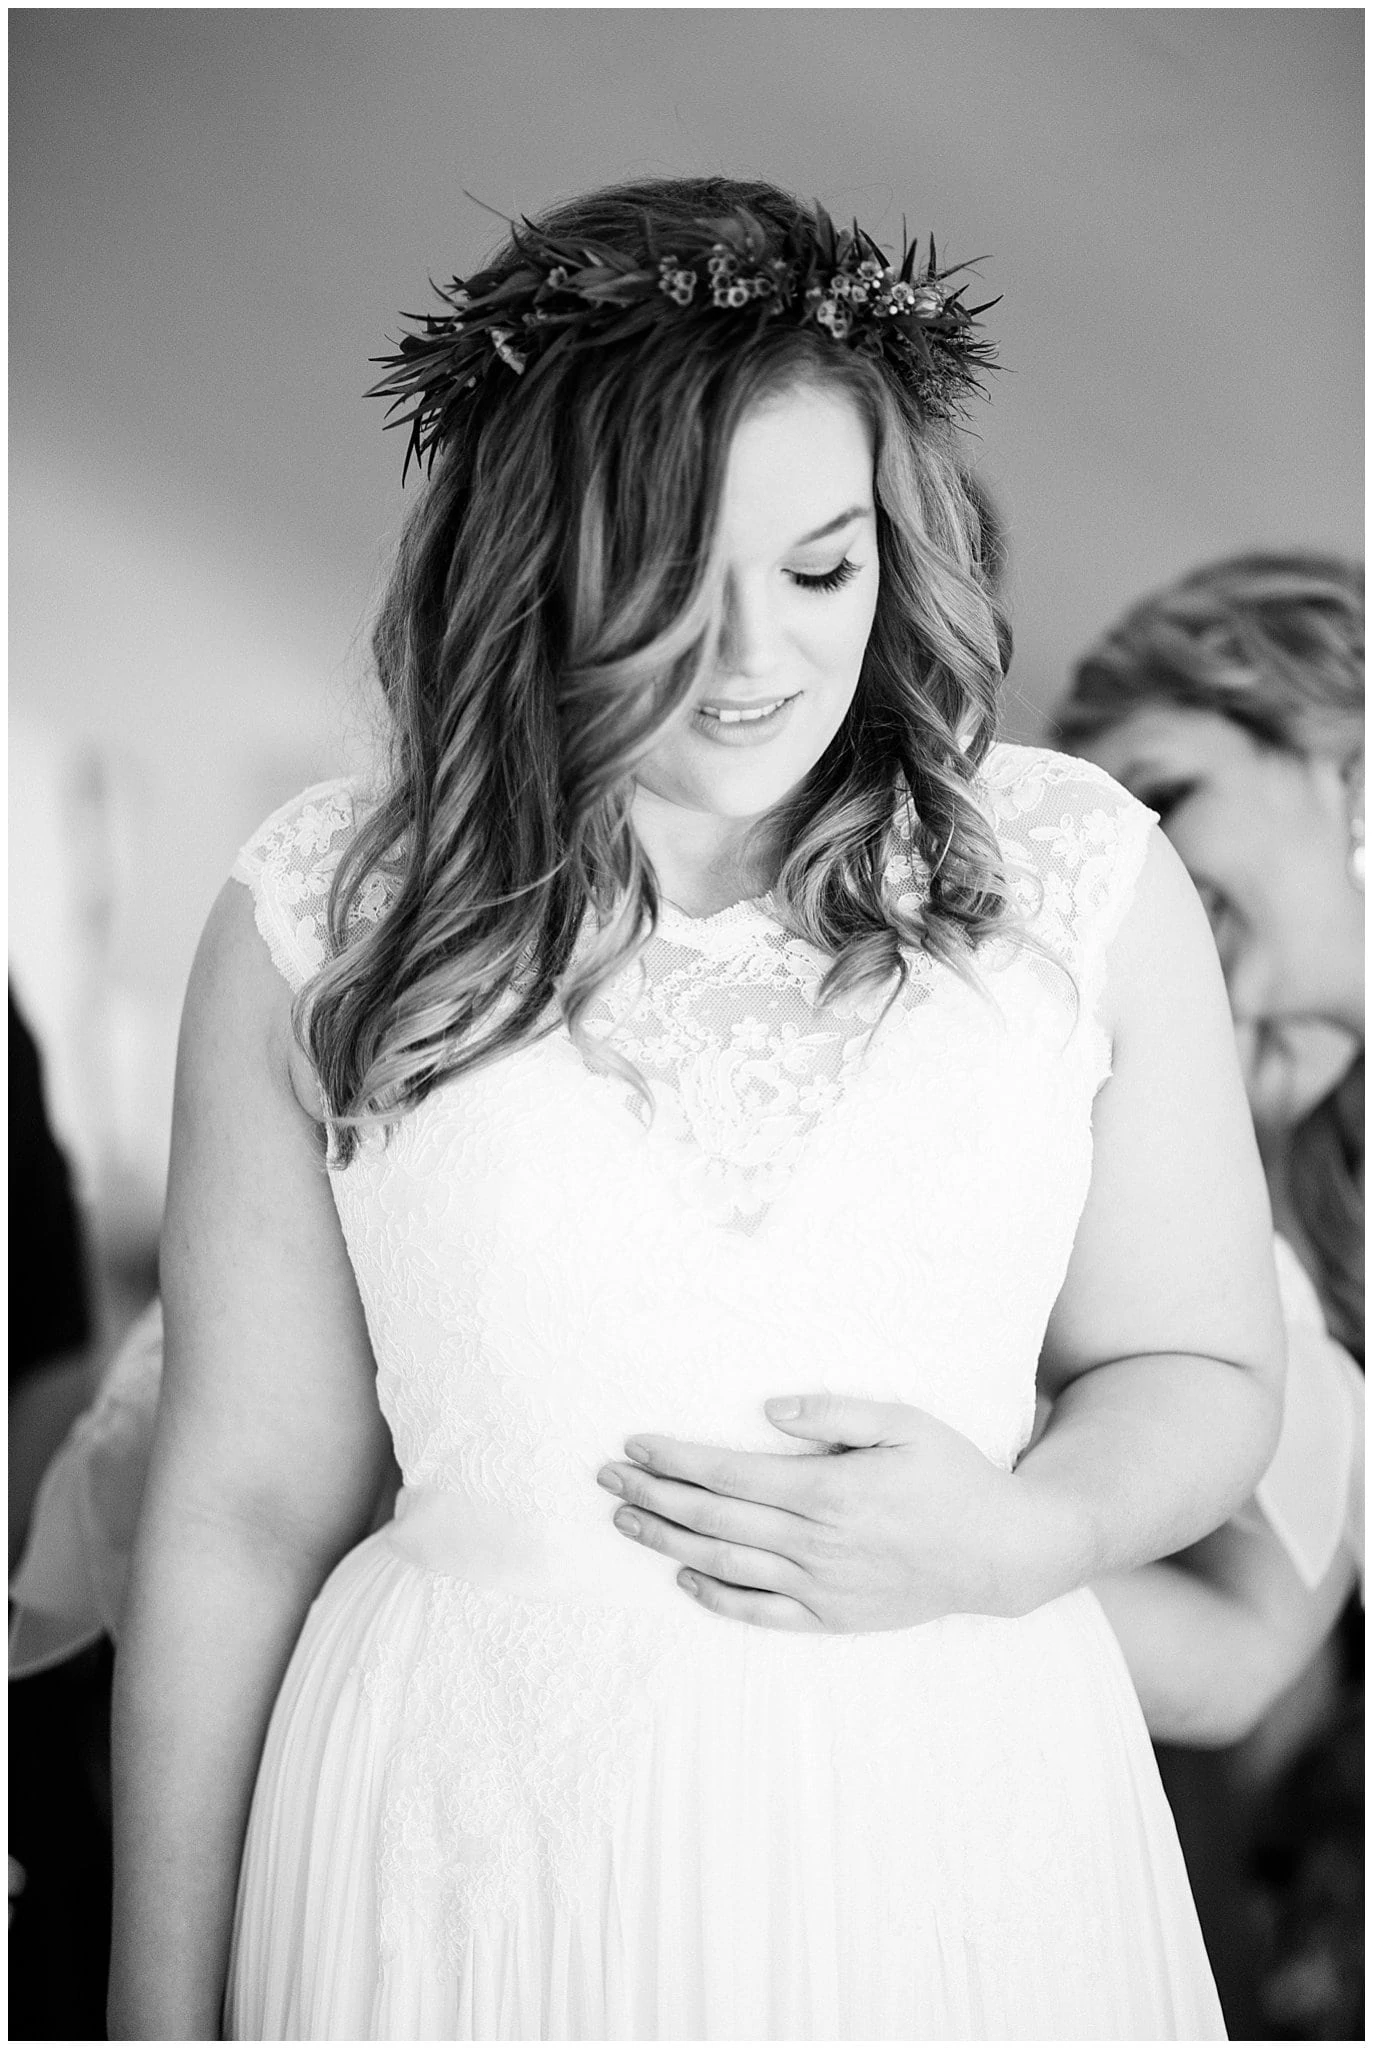 bride in emma and grace dress at Lyons Riverbend wedding by Lyons wedding photographer Jennie Crate